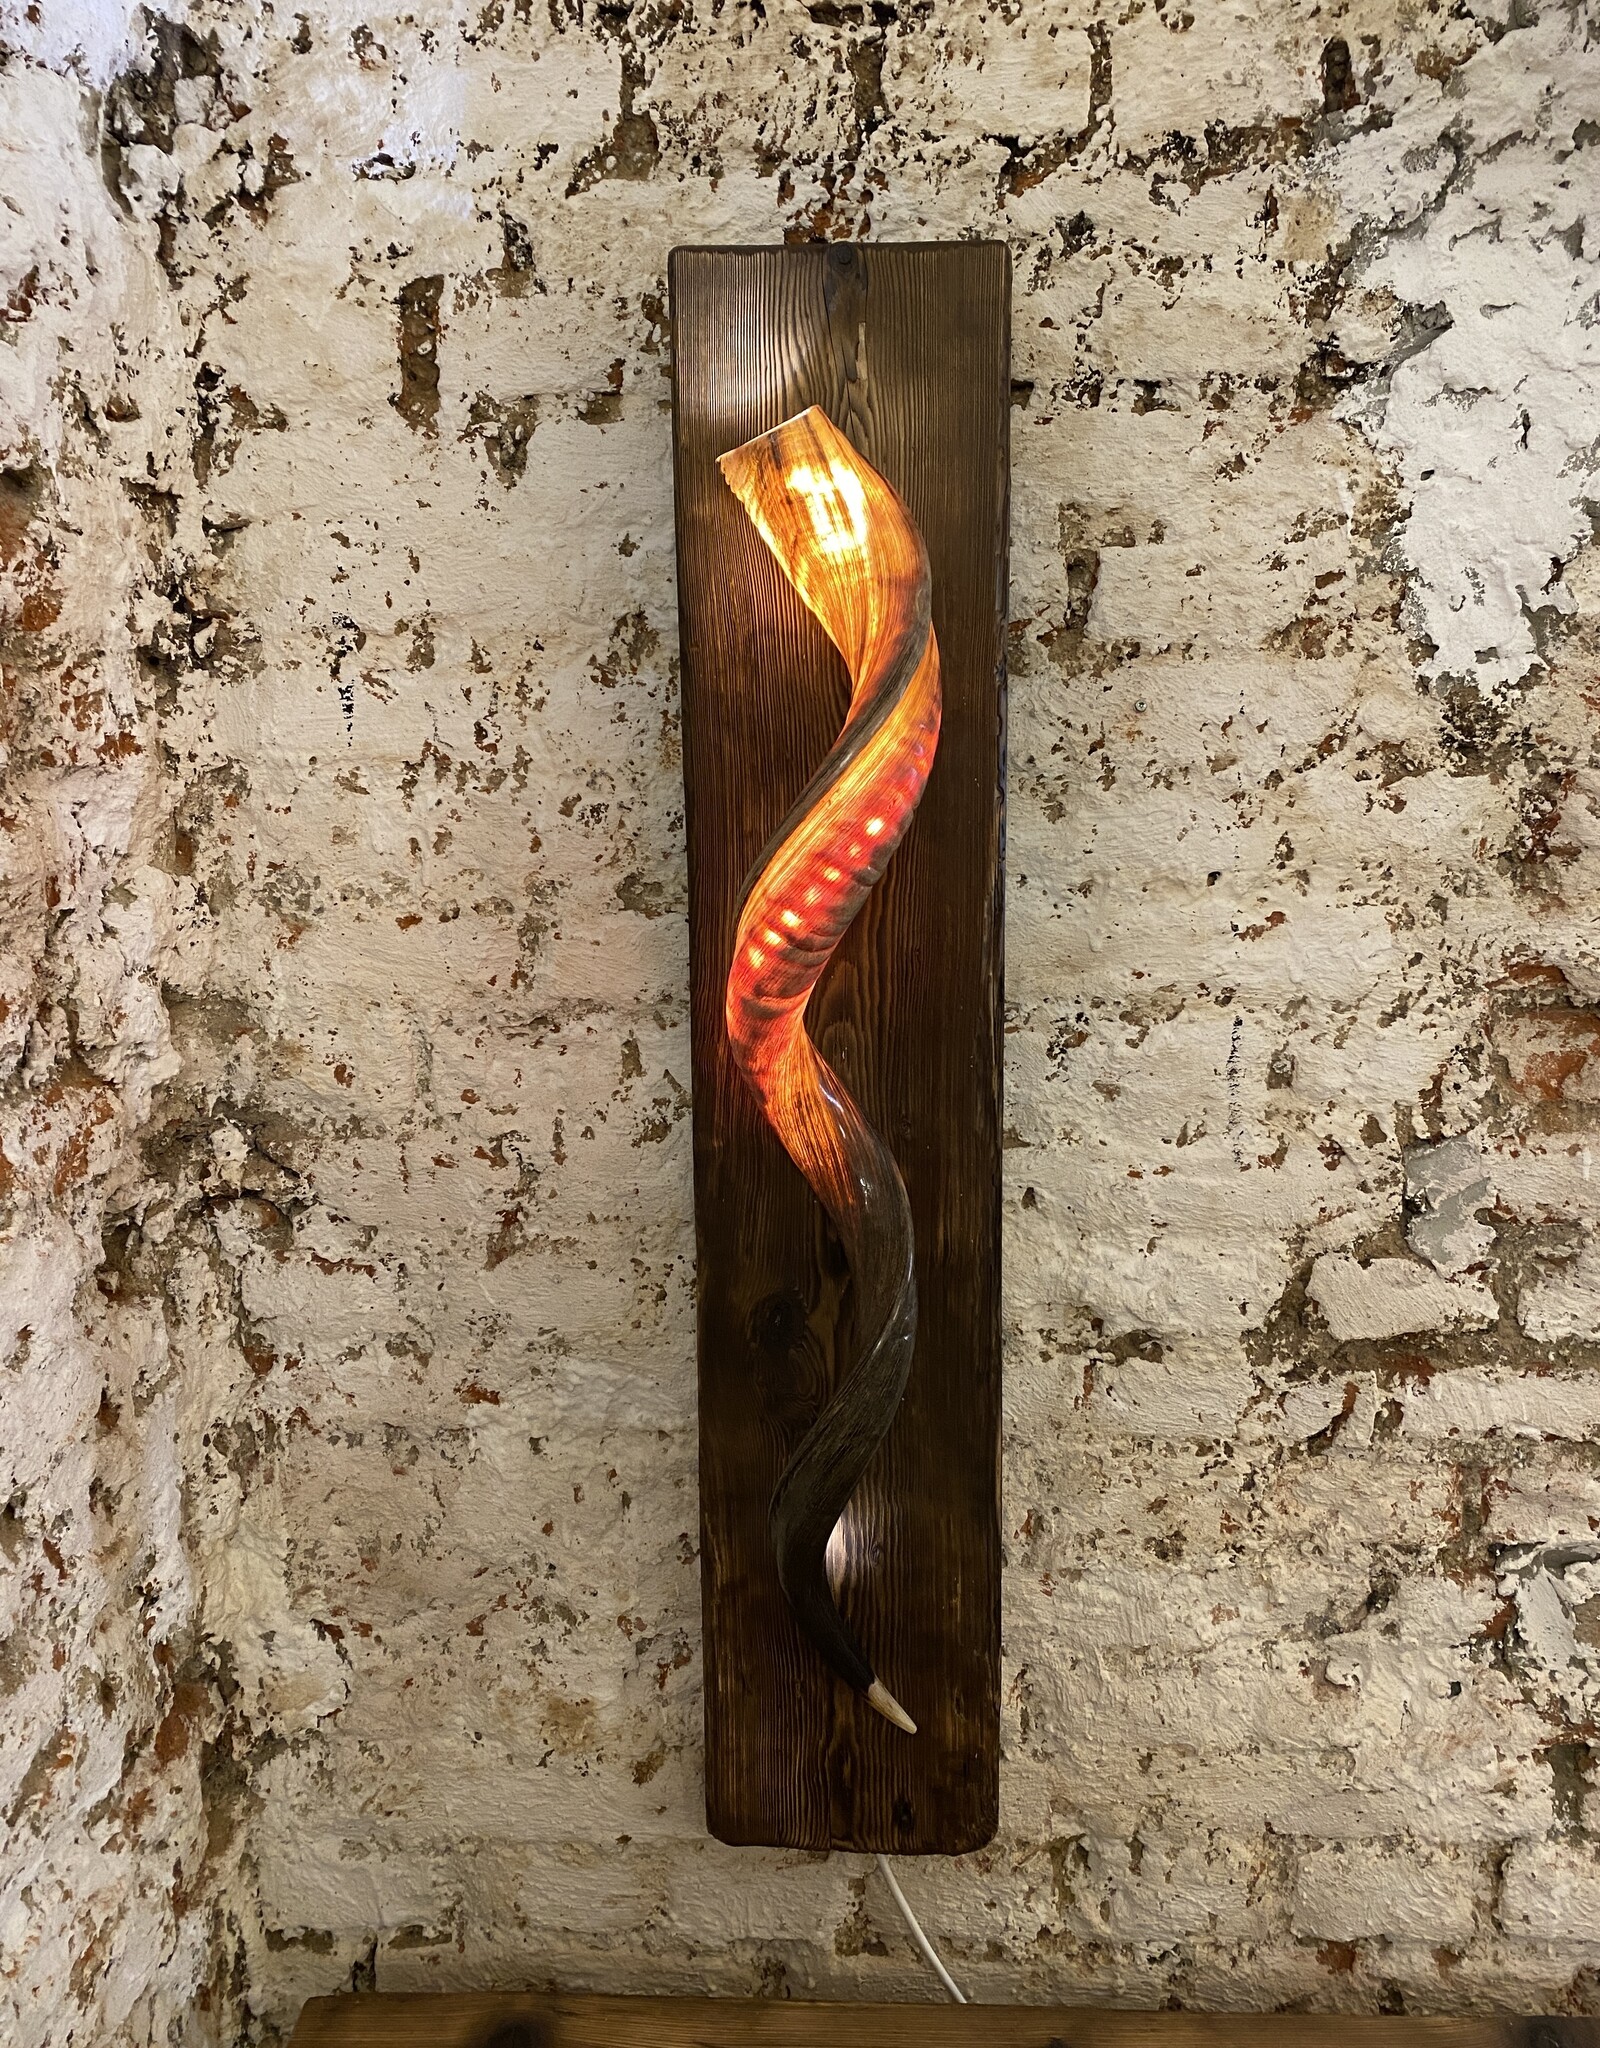 Handcrafted Kudu Horn Wall Lamp – Unique Exotic Design with LED Lighting